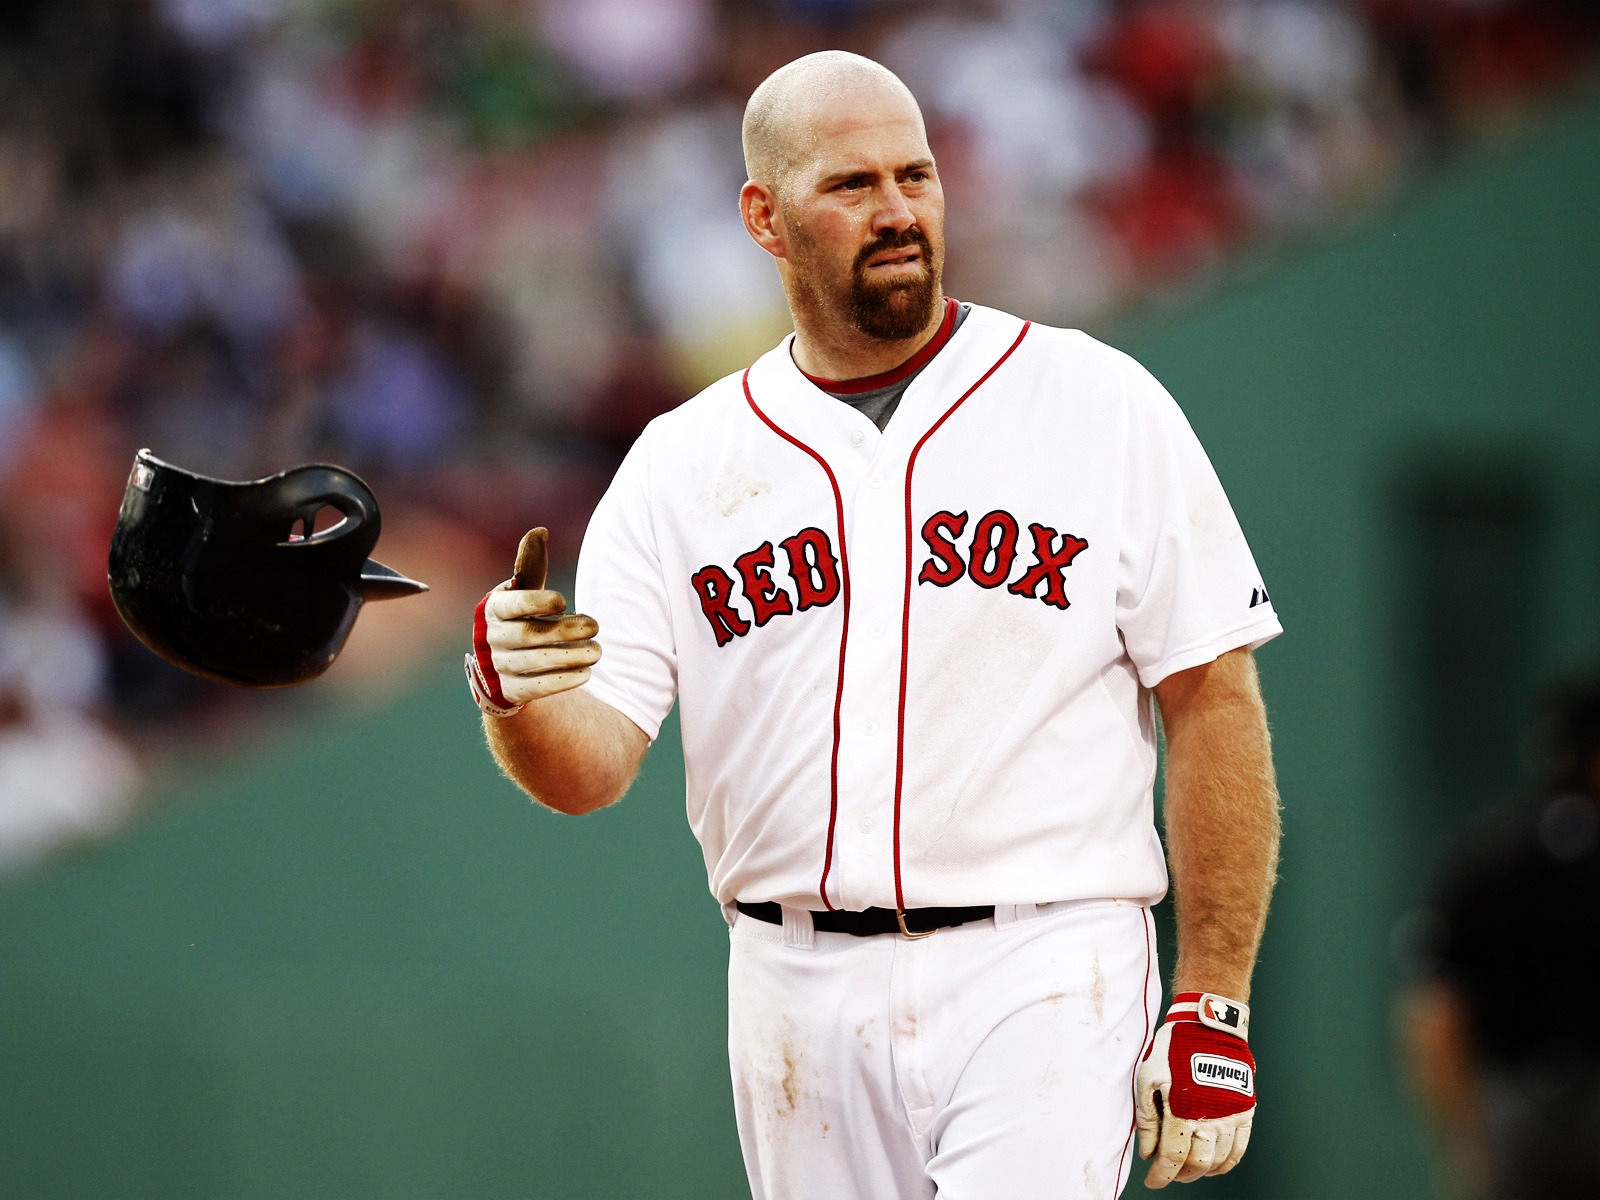 Kevin Youkilis for 1600 x 1200 resolution